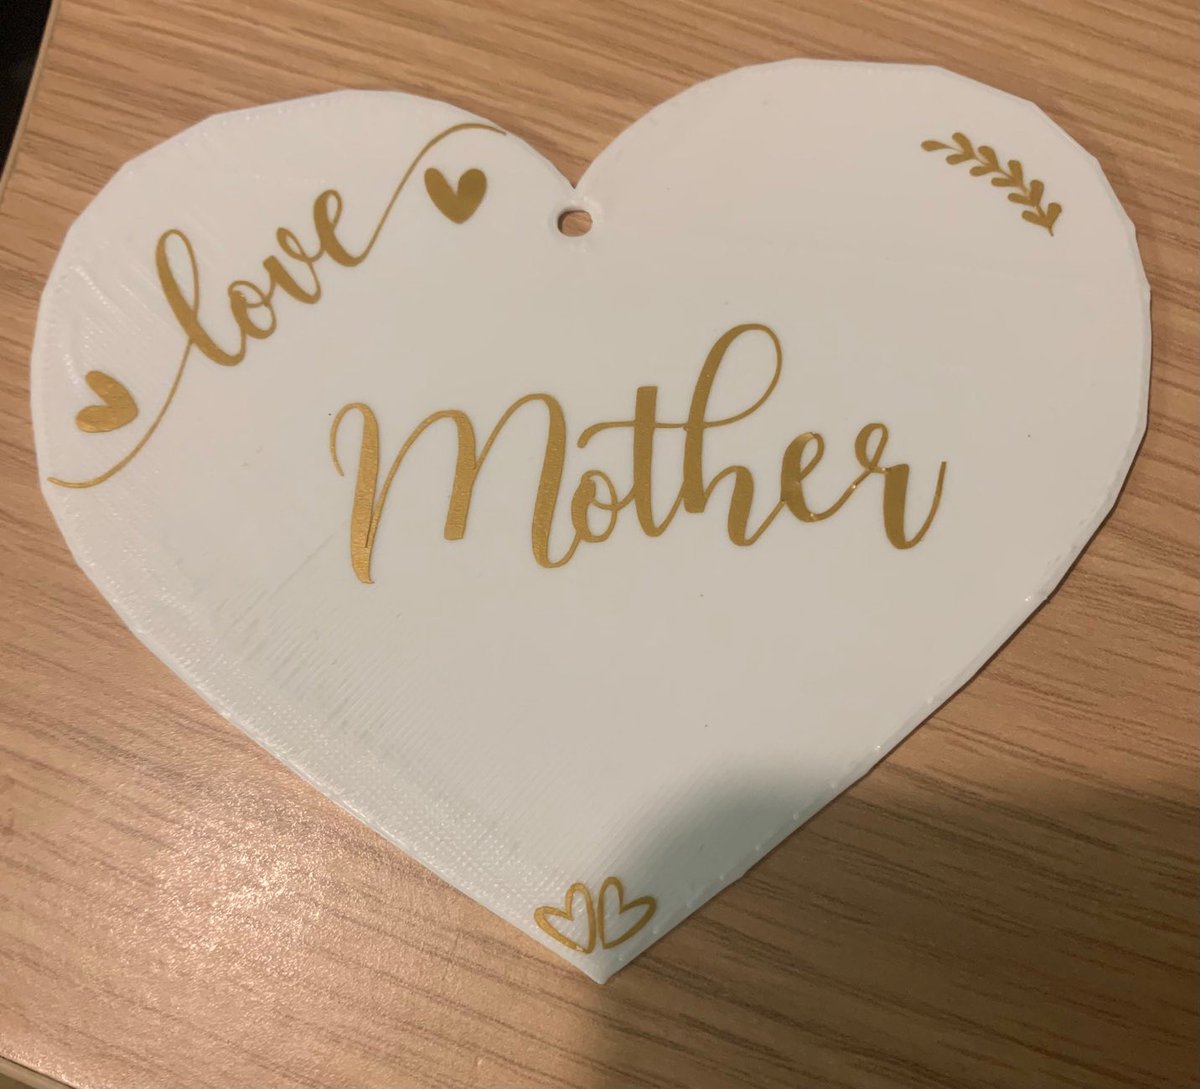 Excited to share this item from my #etsy shop: A lovely 3d print heart sign. Would make a lovely mother day gift #mothersday #lovehearts #heartsign #mother #personalgift #motherofgirls #motherofboys #parentchild #wifegirlfriend etsy.me/3ICxn8s